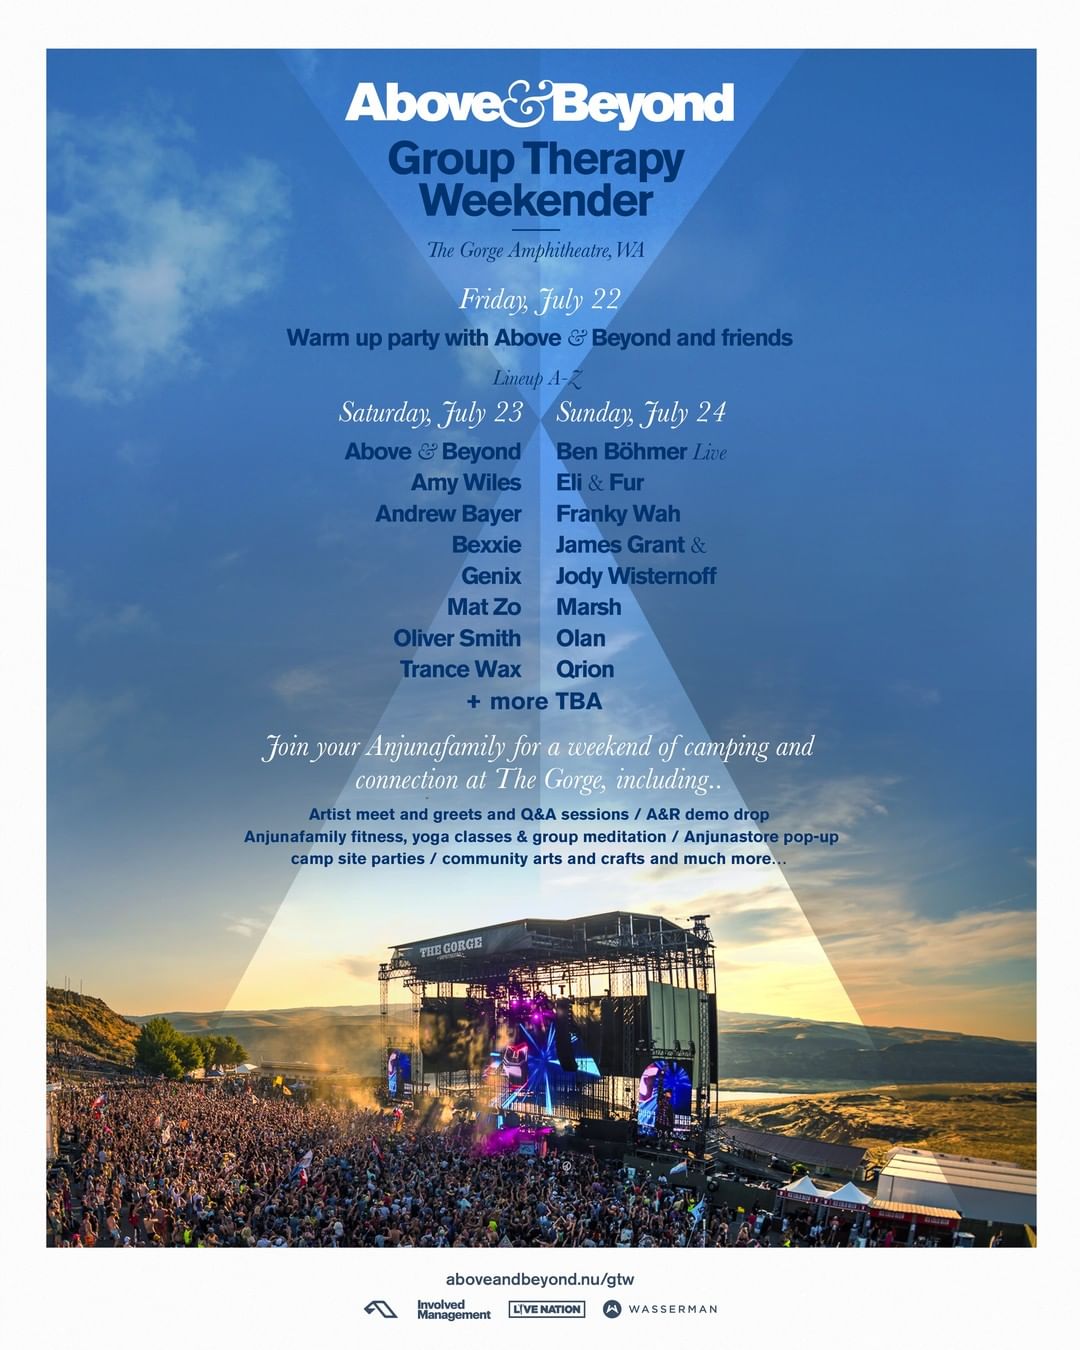 Above & Beyond Releases Initial Lineup for Group Therapy Weekender 2022